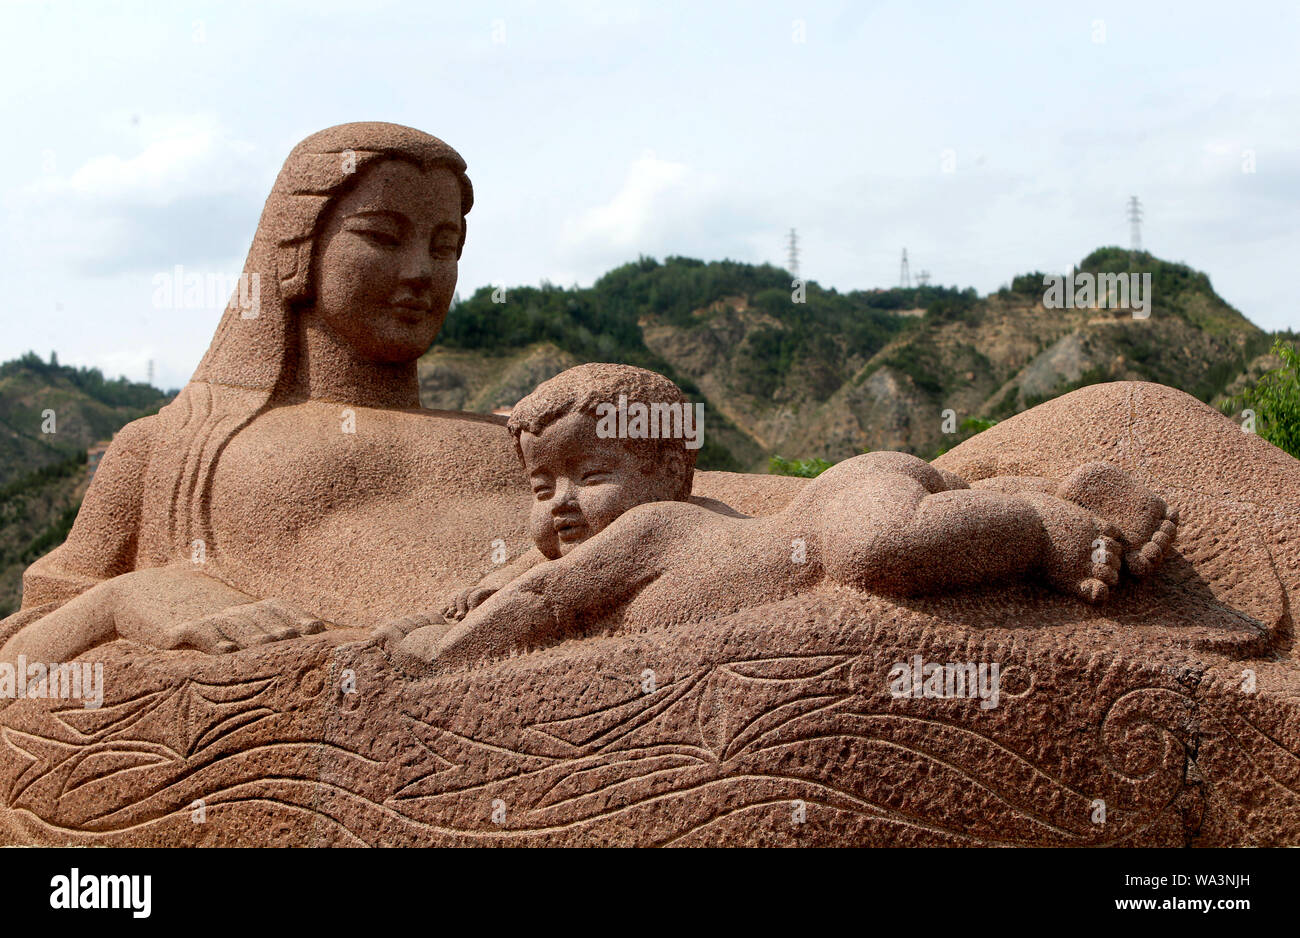 The Yellow River mother statue Stock Photo